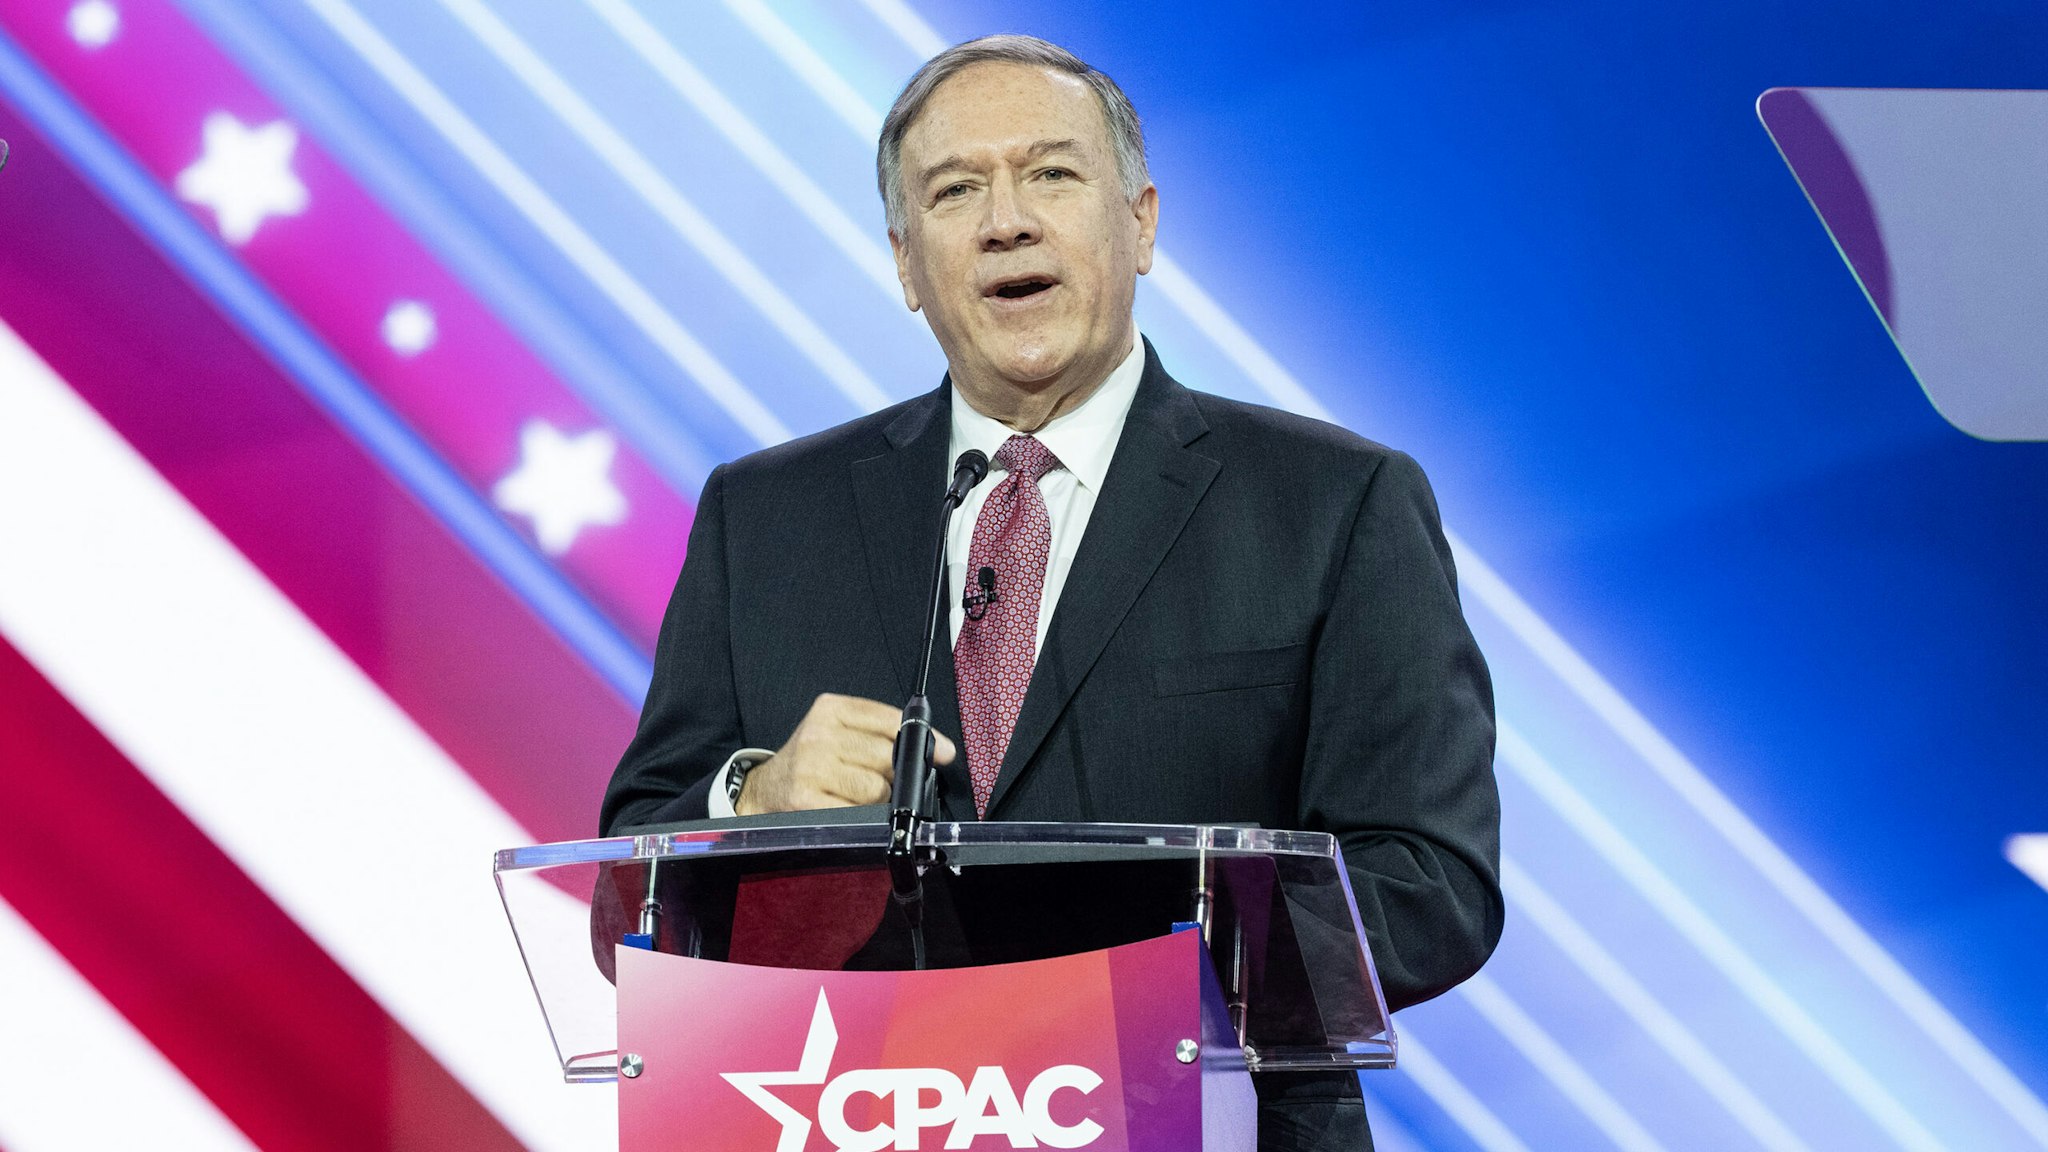 WASHINGTON, DC, DISTRICT OF COLUMBIA, UNITED STATES - 2023/03/03: Mike Pompeo, 70th United States Secretary of State speaks on the 2nd day of the CPAC (Conservative Political Action Conference) Washington, DC conference at Gaylord National Harbor Resort &amp; Convention.